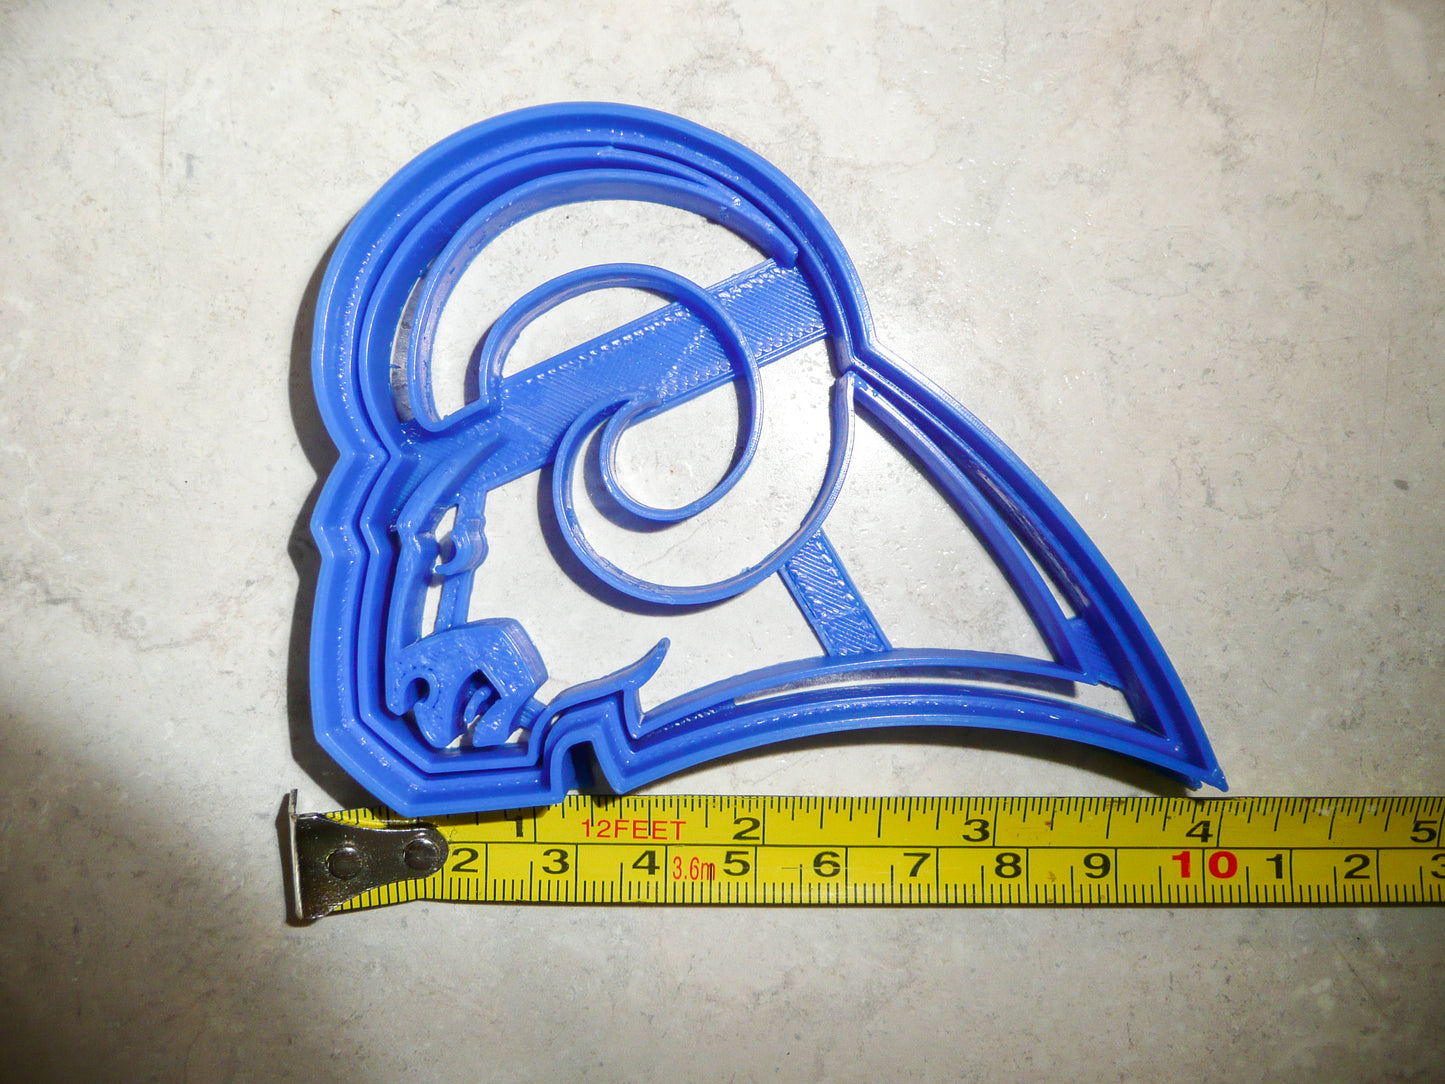 Los Angeles Rams NFL Football Team Cookie Cutter Made in USA PR977